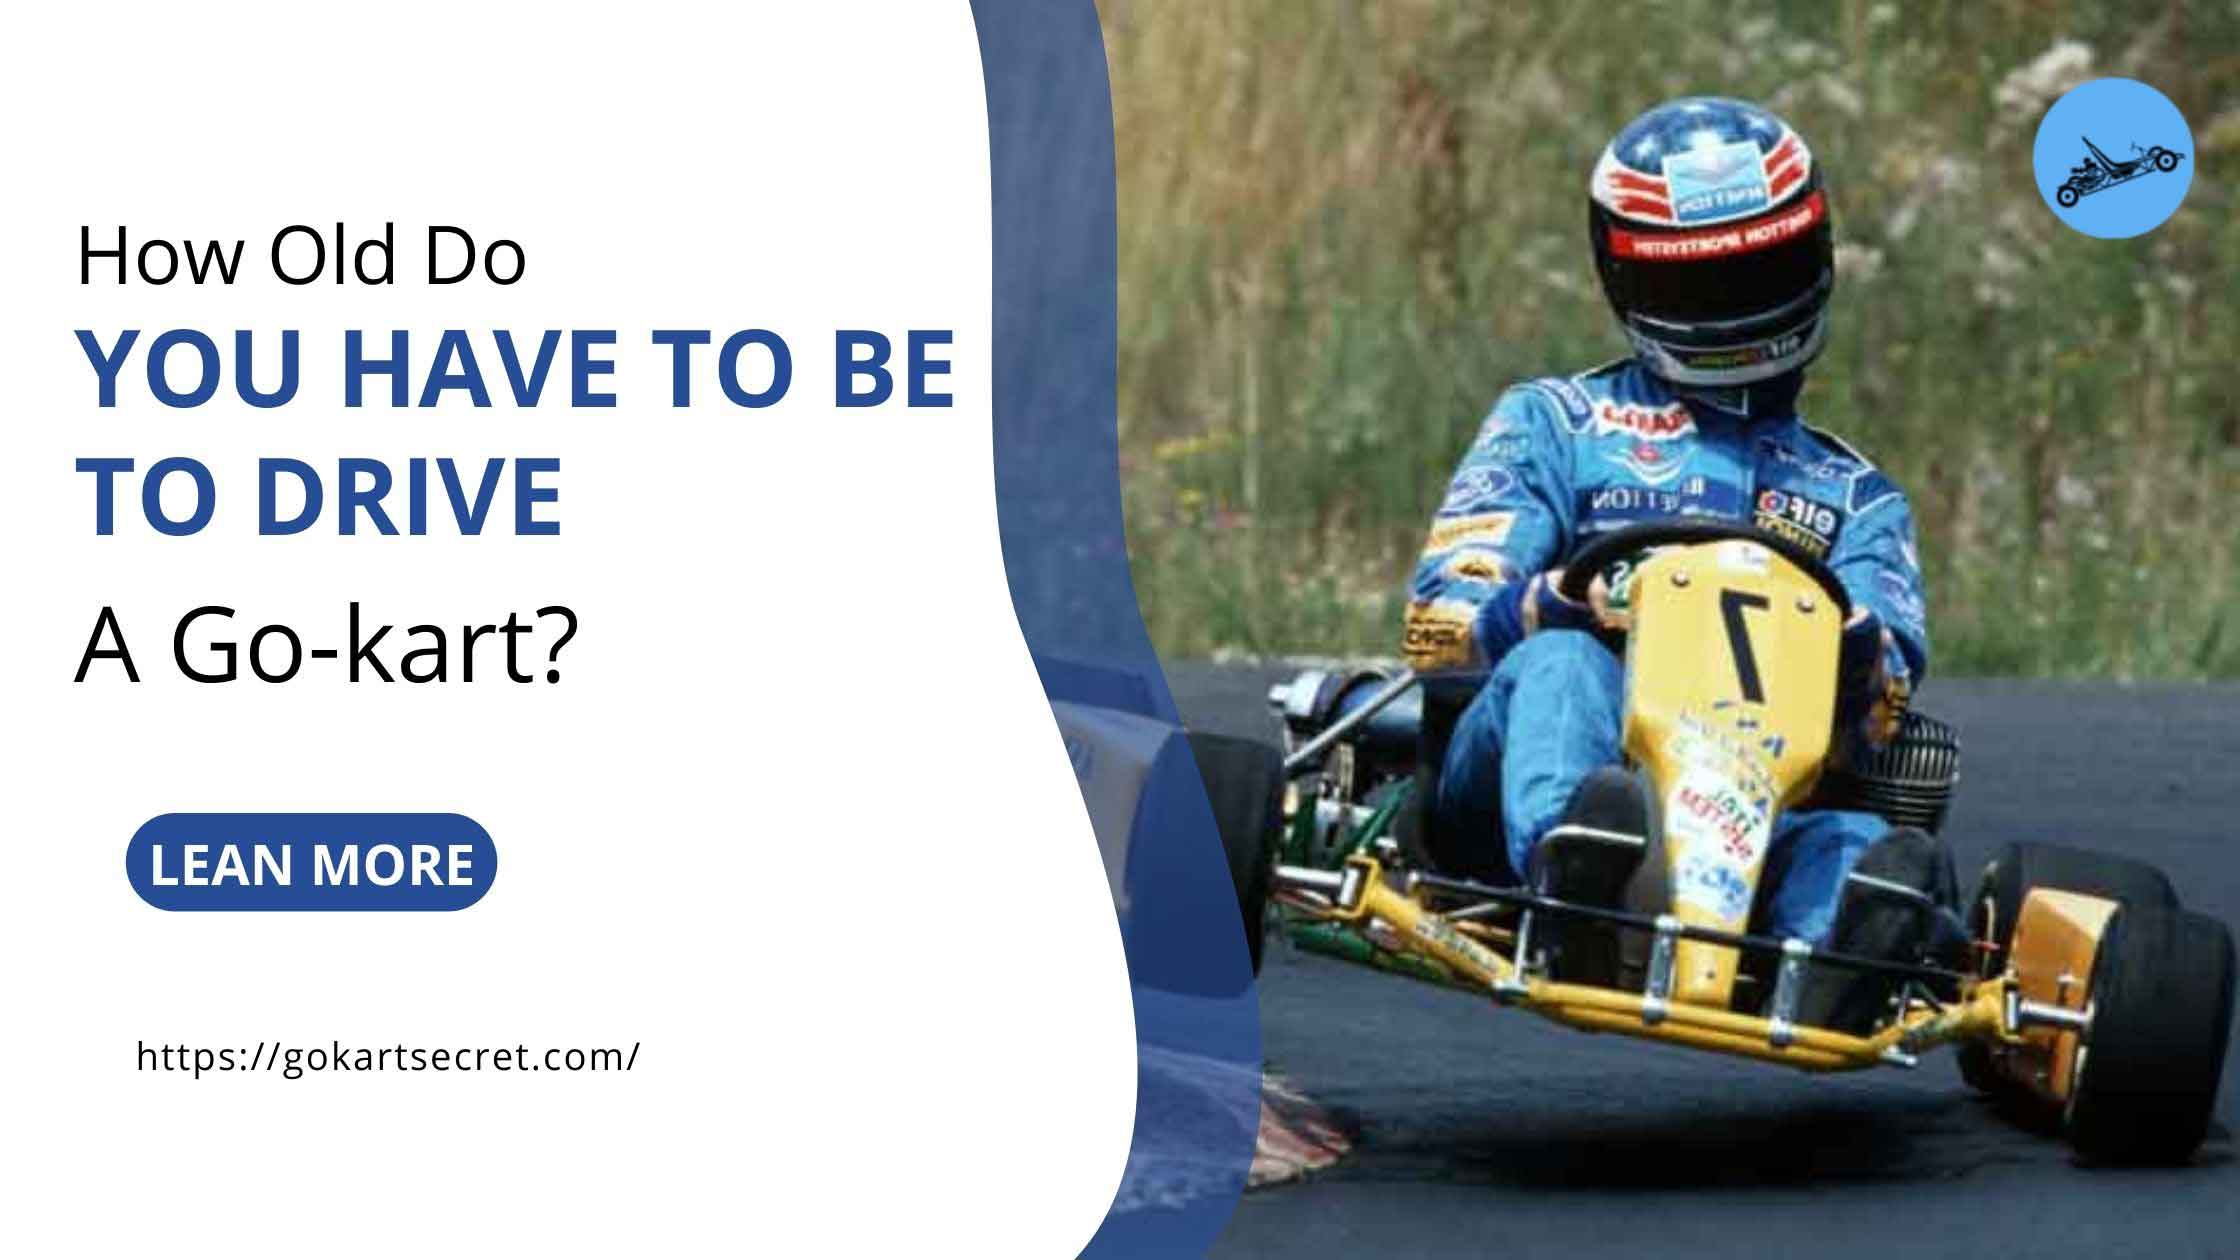 How Old Do You Have To Be To Drive A Go-kart?